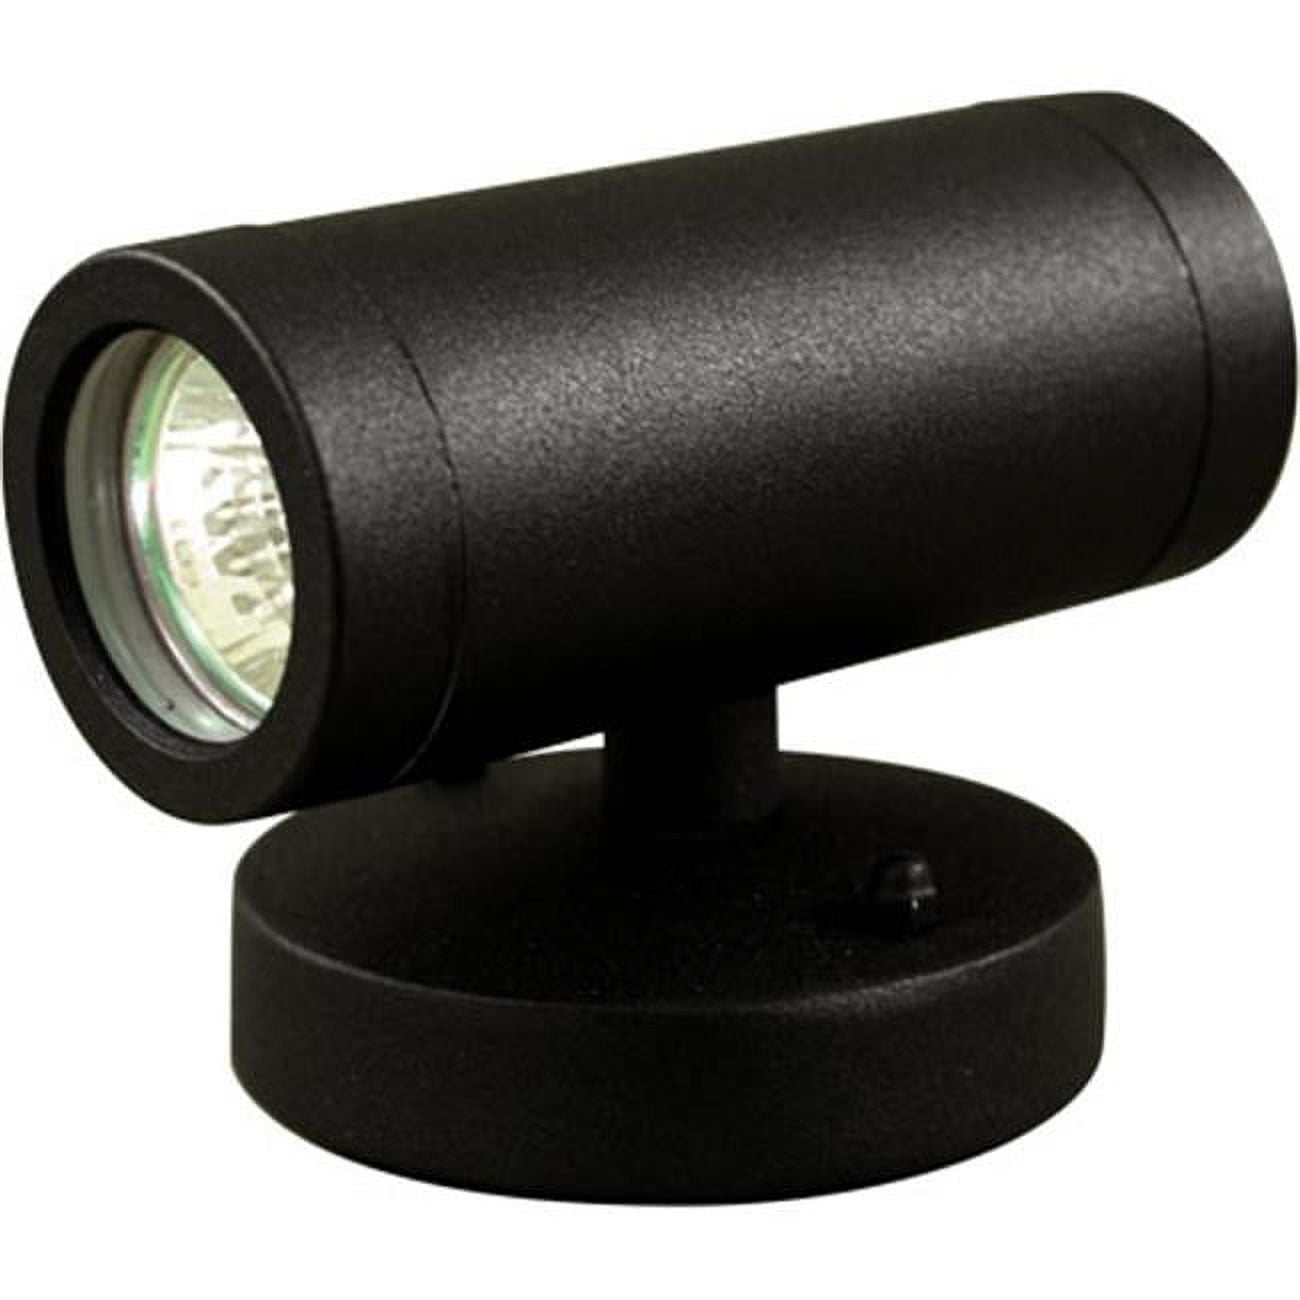 Picture of Dabmar Lighting LV49-B Cast Aluminum Surface Mount Up-Down, Brick, Step, Wall & Deck Light, Black - 5.44 x 4 x 4 in.